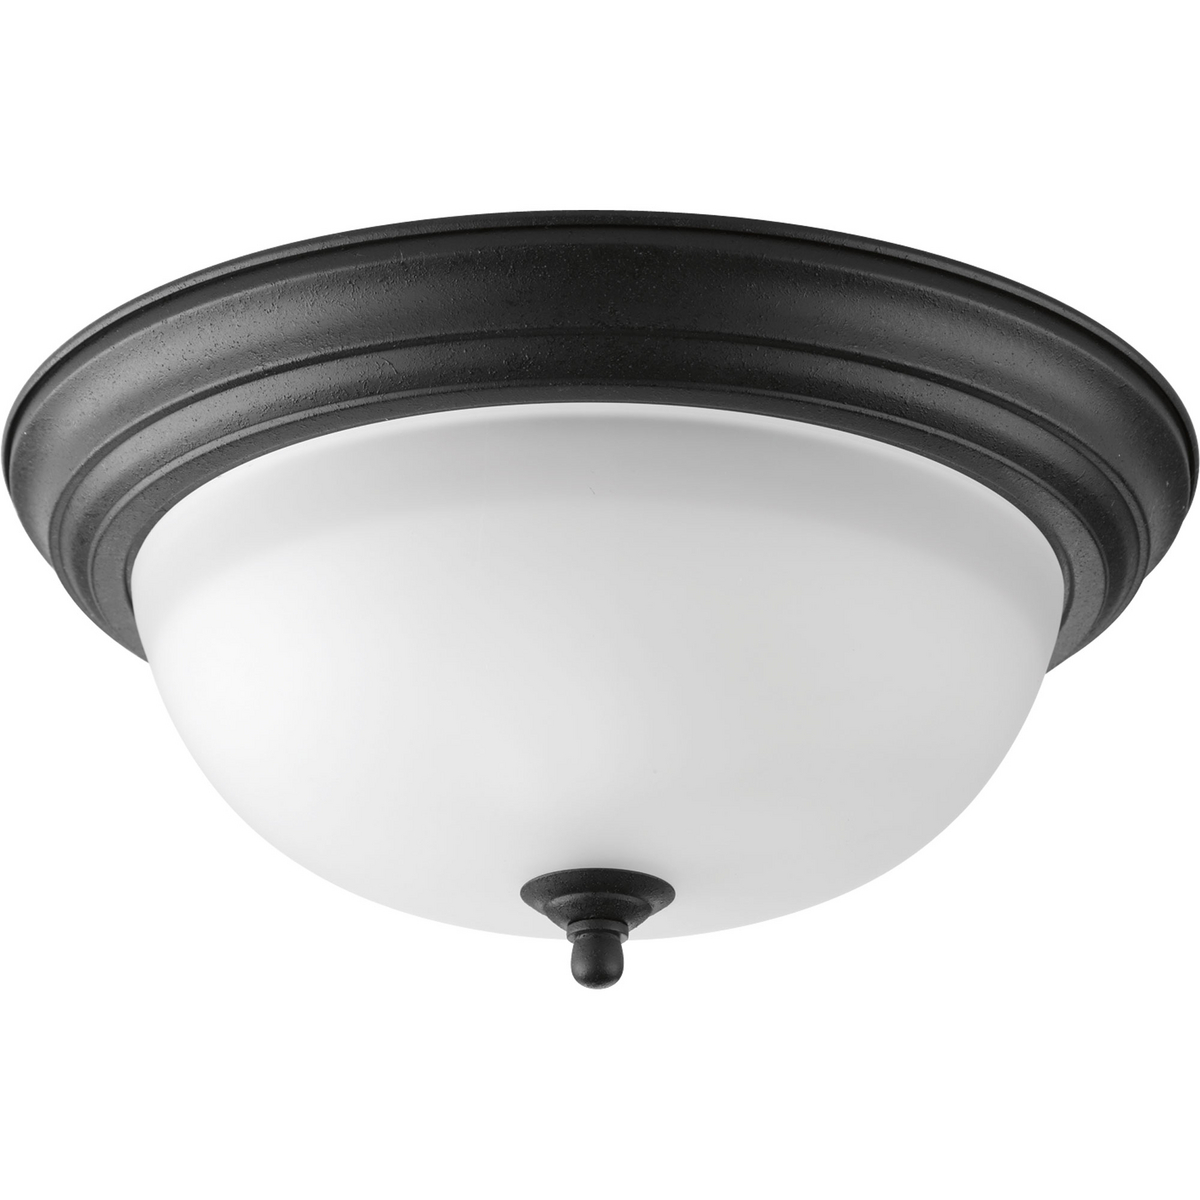 Two-light flush mount with dome shaped alabaster glass, solid trim and decorative knobs. Center lock-up with matching finial. Forged Black finish.